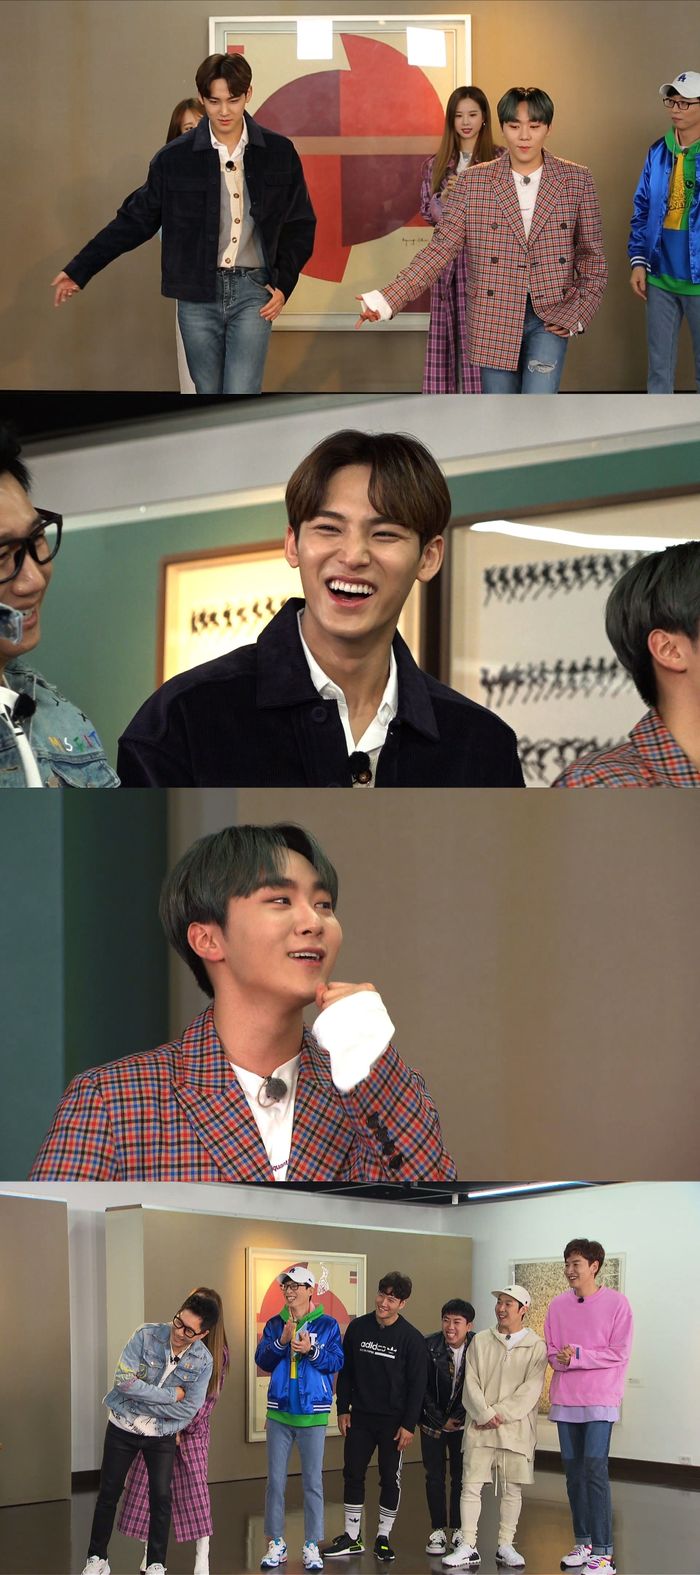 Group Seventeen members Mingyu and Boo Seungkwan play entertainment stone.On SBS Running Man to be broadcasted on the 21st, actors Kim Hye-yoon and Han Bo-reum, group EXID Hani and Solji, Seventeen Mingyu and Boo Seungkwan appear as guests and confront real-time search word number one.At the time of the previous filming, Seventeen was unable to hide his excitement from the appearance, saying, It is the first appearance of Running Man after 100 to 100 Race in 2015.Seventeen made a commitment to win the race on the day when he won the first place in real-time search terms.Boo Seungkwan, who has gathered topics with various personalities to be called personal machine, surprised the members by showing the song Wi-Fi mochang of Yoon Jong Shin, which was popular recently, from the singer Lee So-ras mochang.The members admired Boo Seungkwans personal period, saying, I did not know that there was so much talent.Yoo Jae-Suk, who met Boo Seungkwan in various broadcasts earlier, said, Boo Seungkwan has a lot of gag time compared to the beginning of his debut. He left a sharp impression alone and made the scene into a laughing sea.Mingyu, also known as Seventeens visual director, said, Is there a member who wants to change his face among the Running Man members?The members said, It is common these days to refuse to do this with a single knife. He could not hide his bitterness and made the scene into a laughing sea once again.On this day, Seventeen showed off the unaccompanied sword dance of HOME which collected a big topic with sword dance.Running Man starring Seventeen Boo Seungkwan and Mingyu will be broadcast at 5 pm on the 21st.